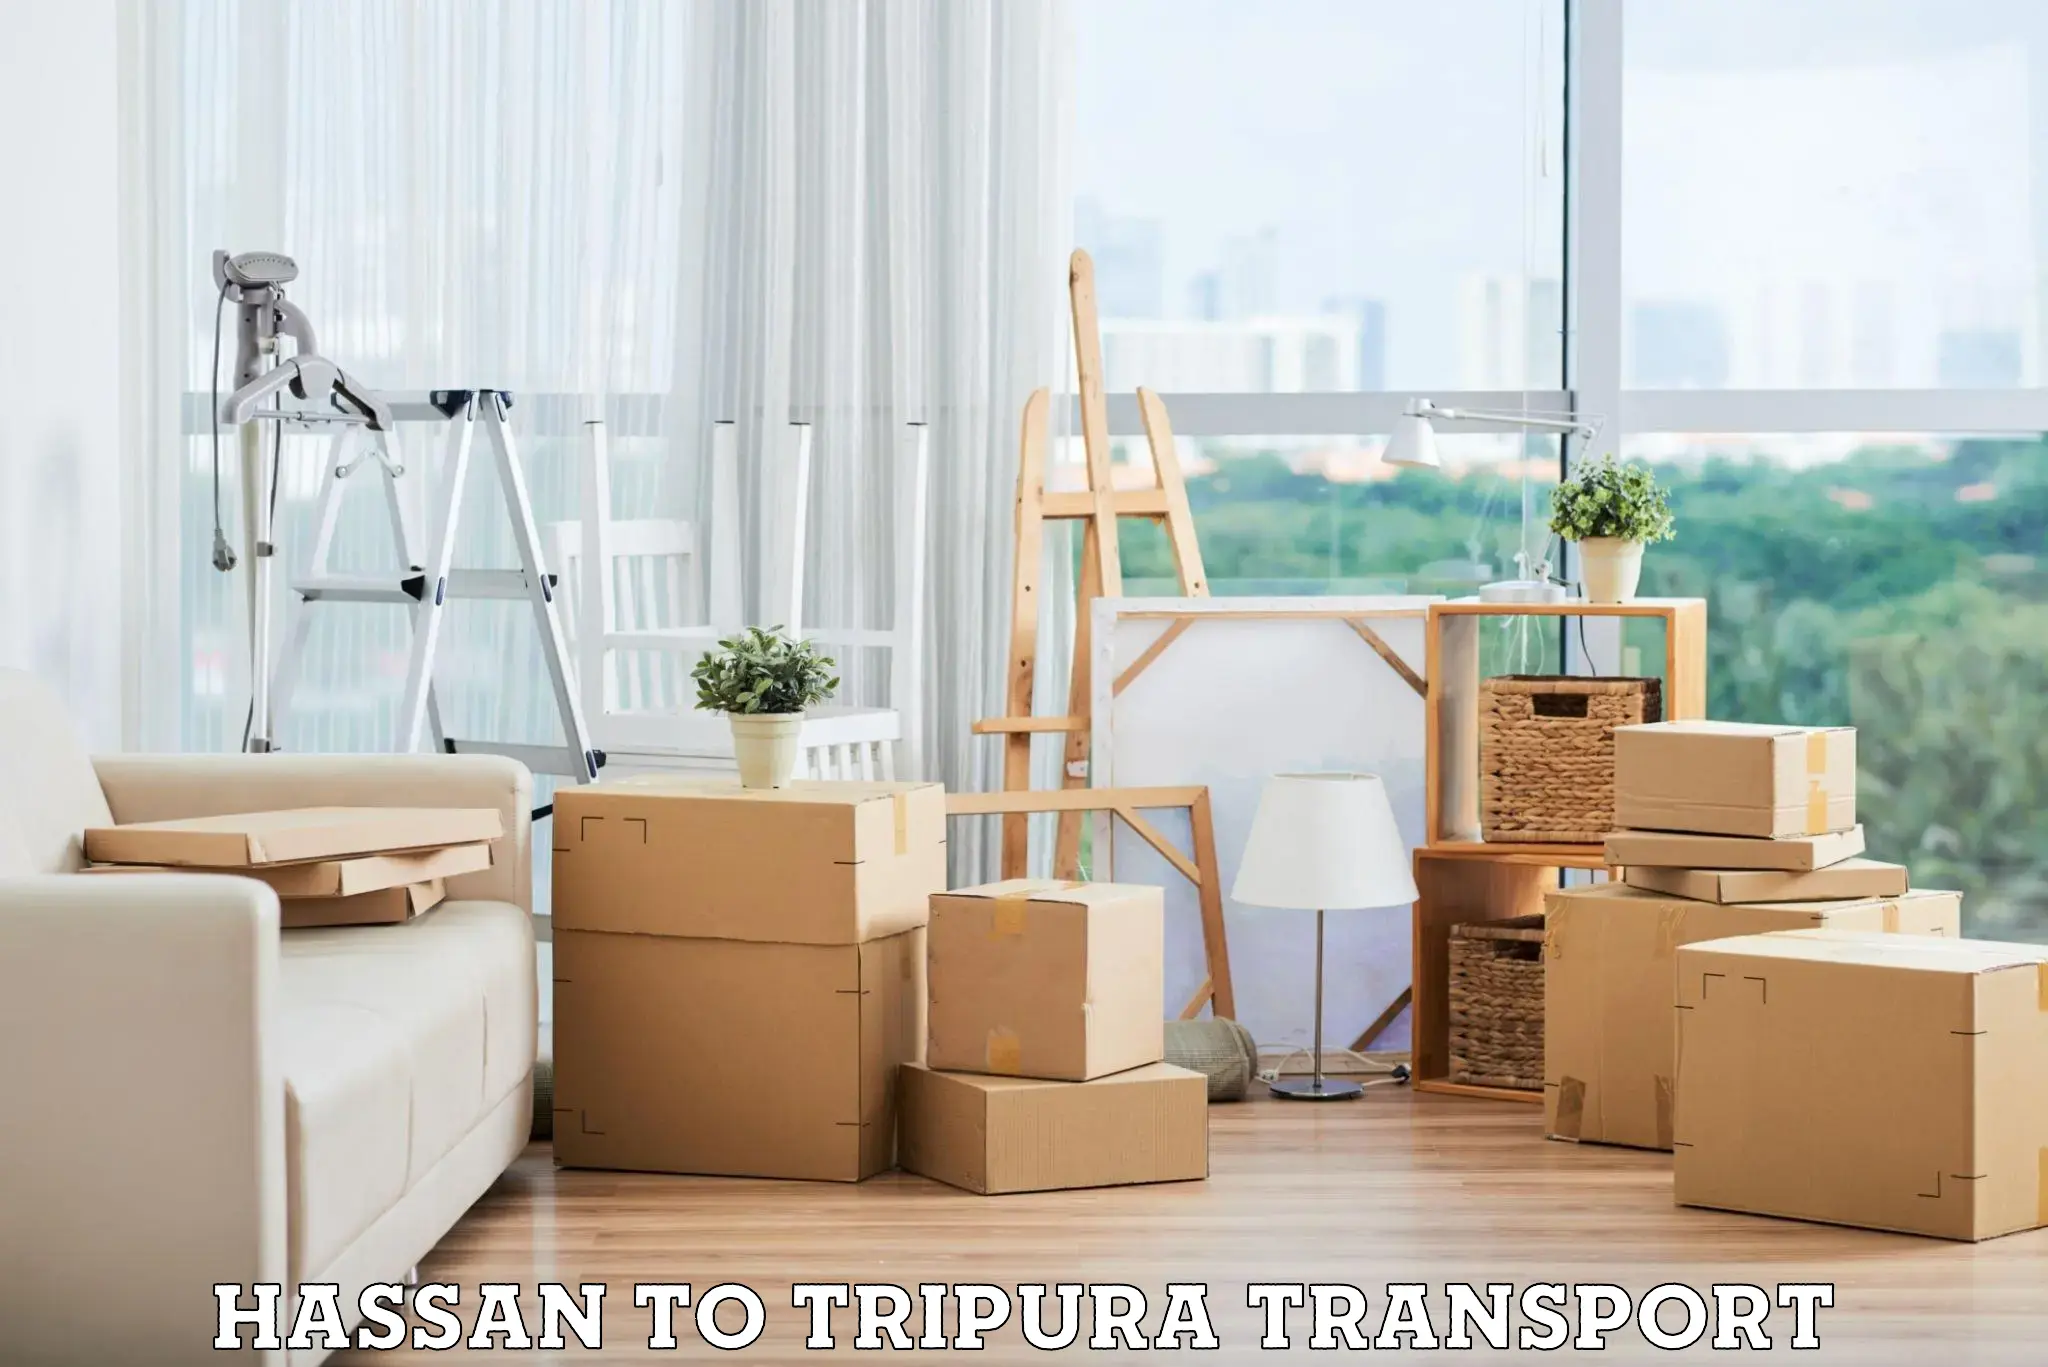 Transport in sharing Hassan to West Tripura